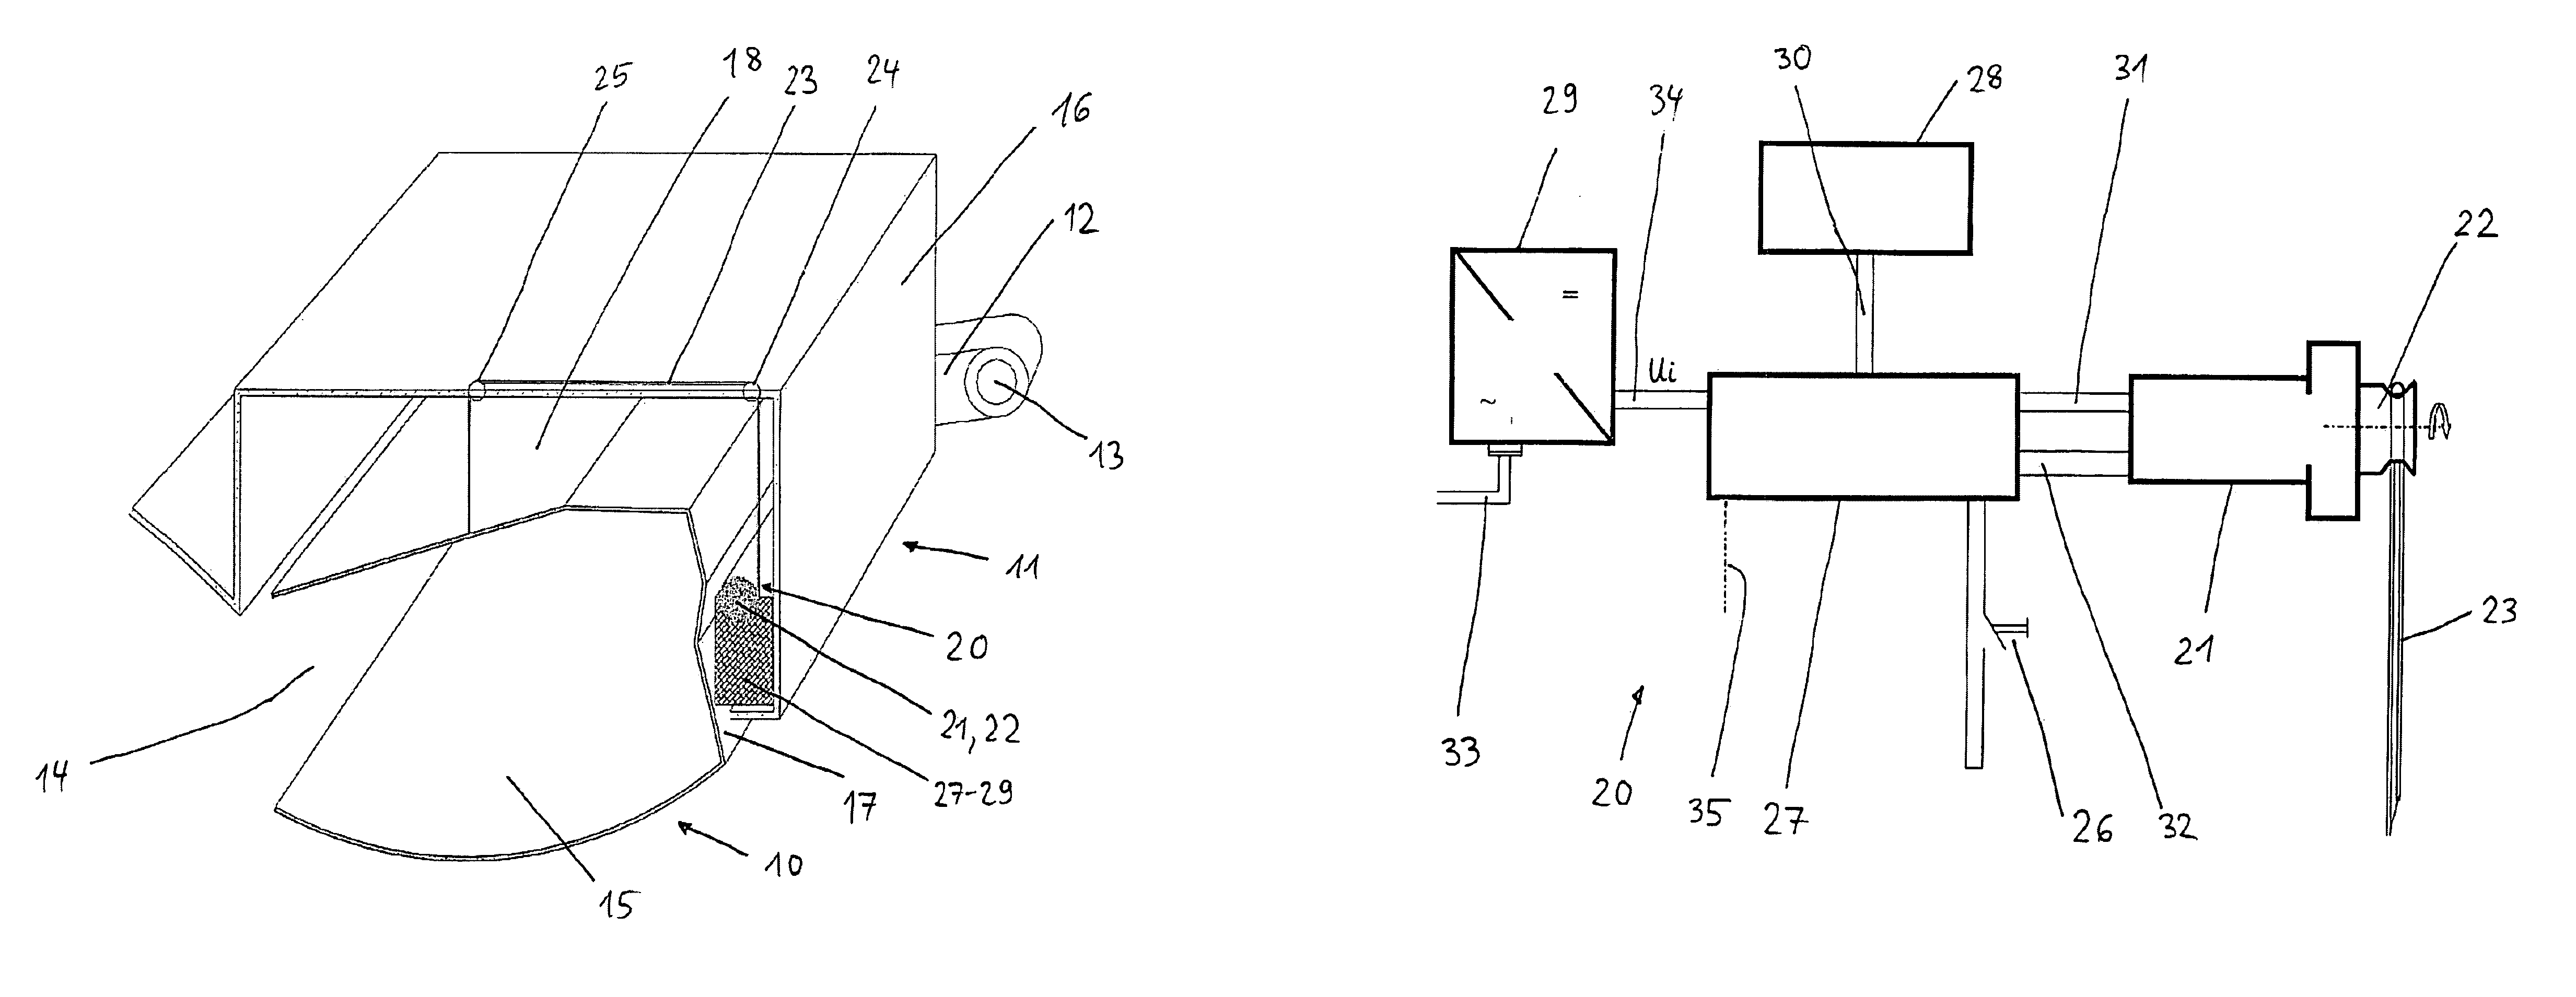 Lifting device for a luggage compartment in an aircraft, as well as aircraft with a lifting device for a luggage compartment